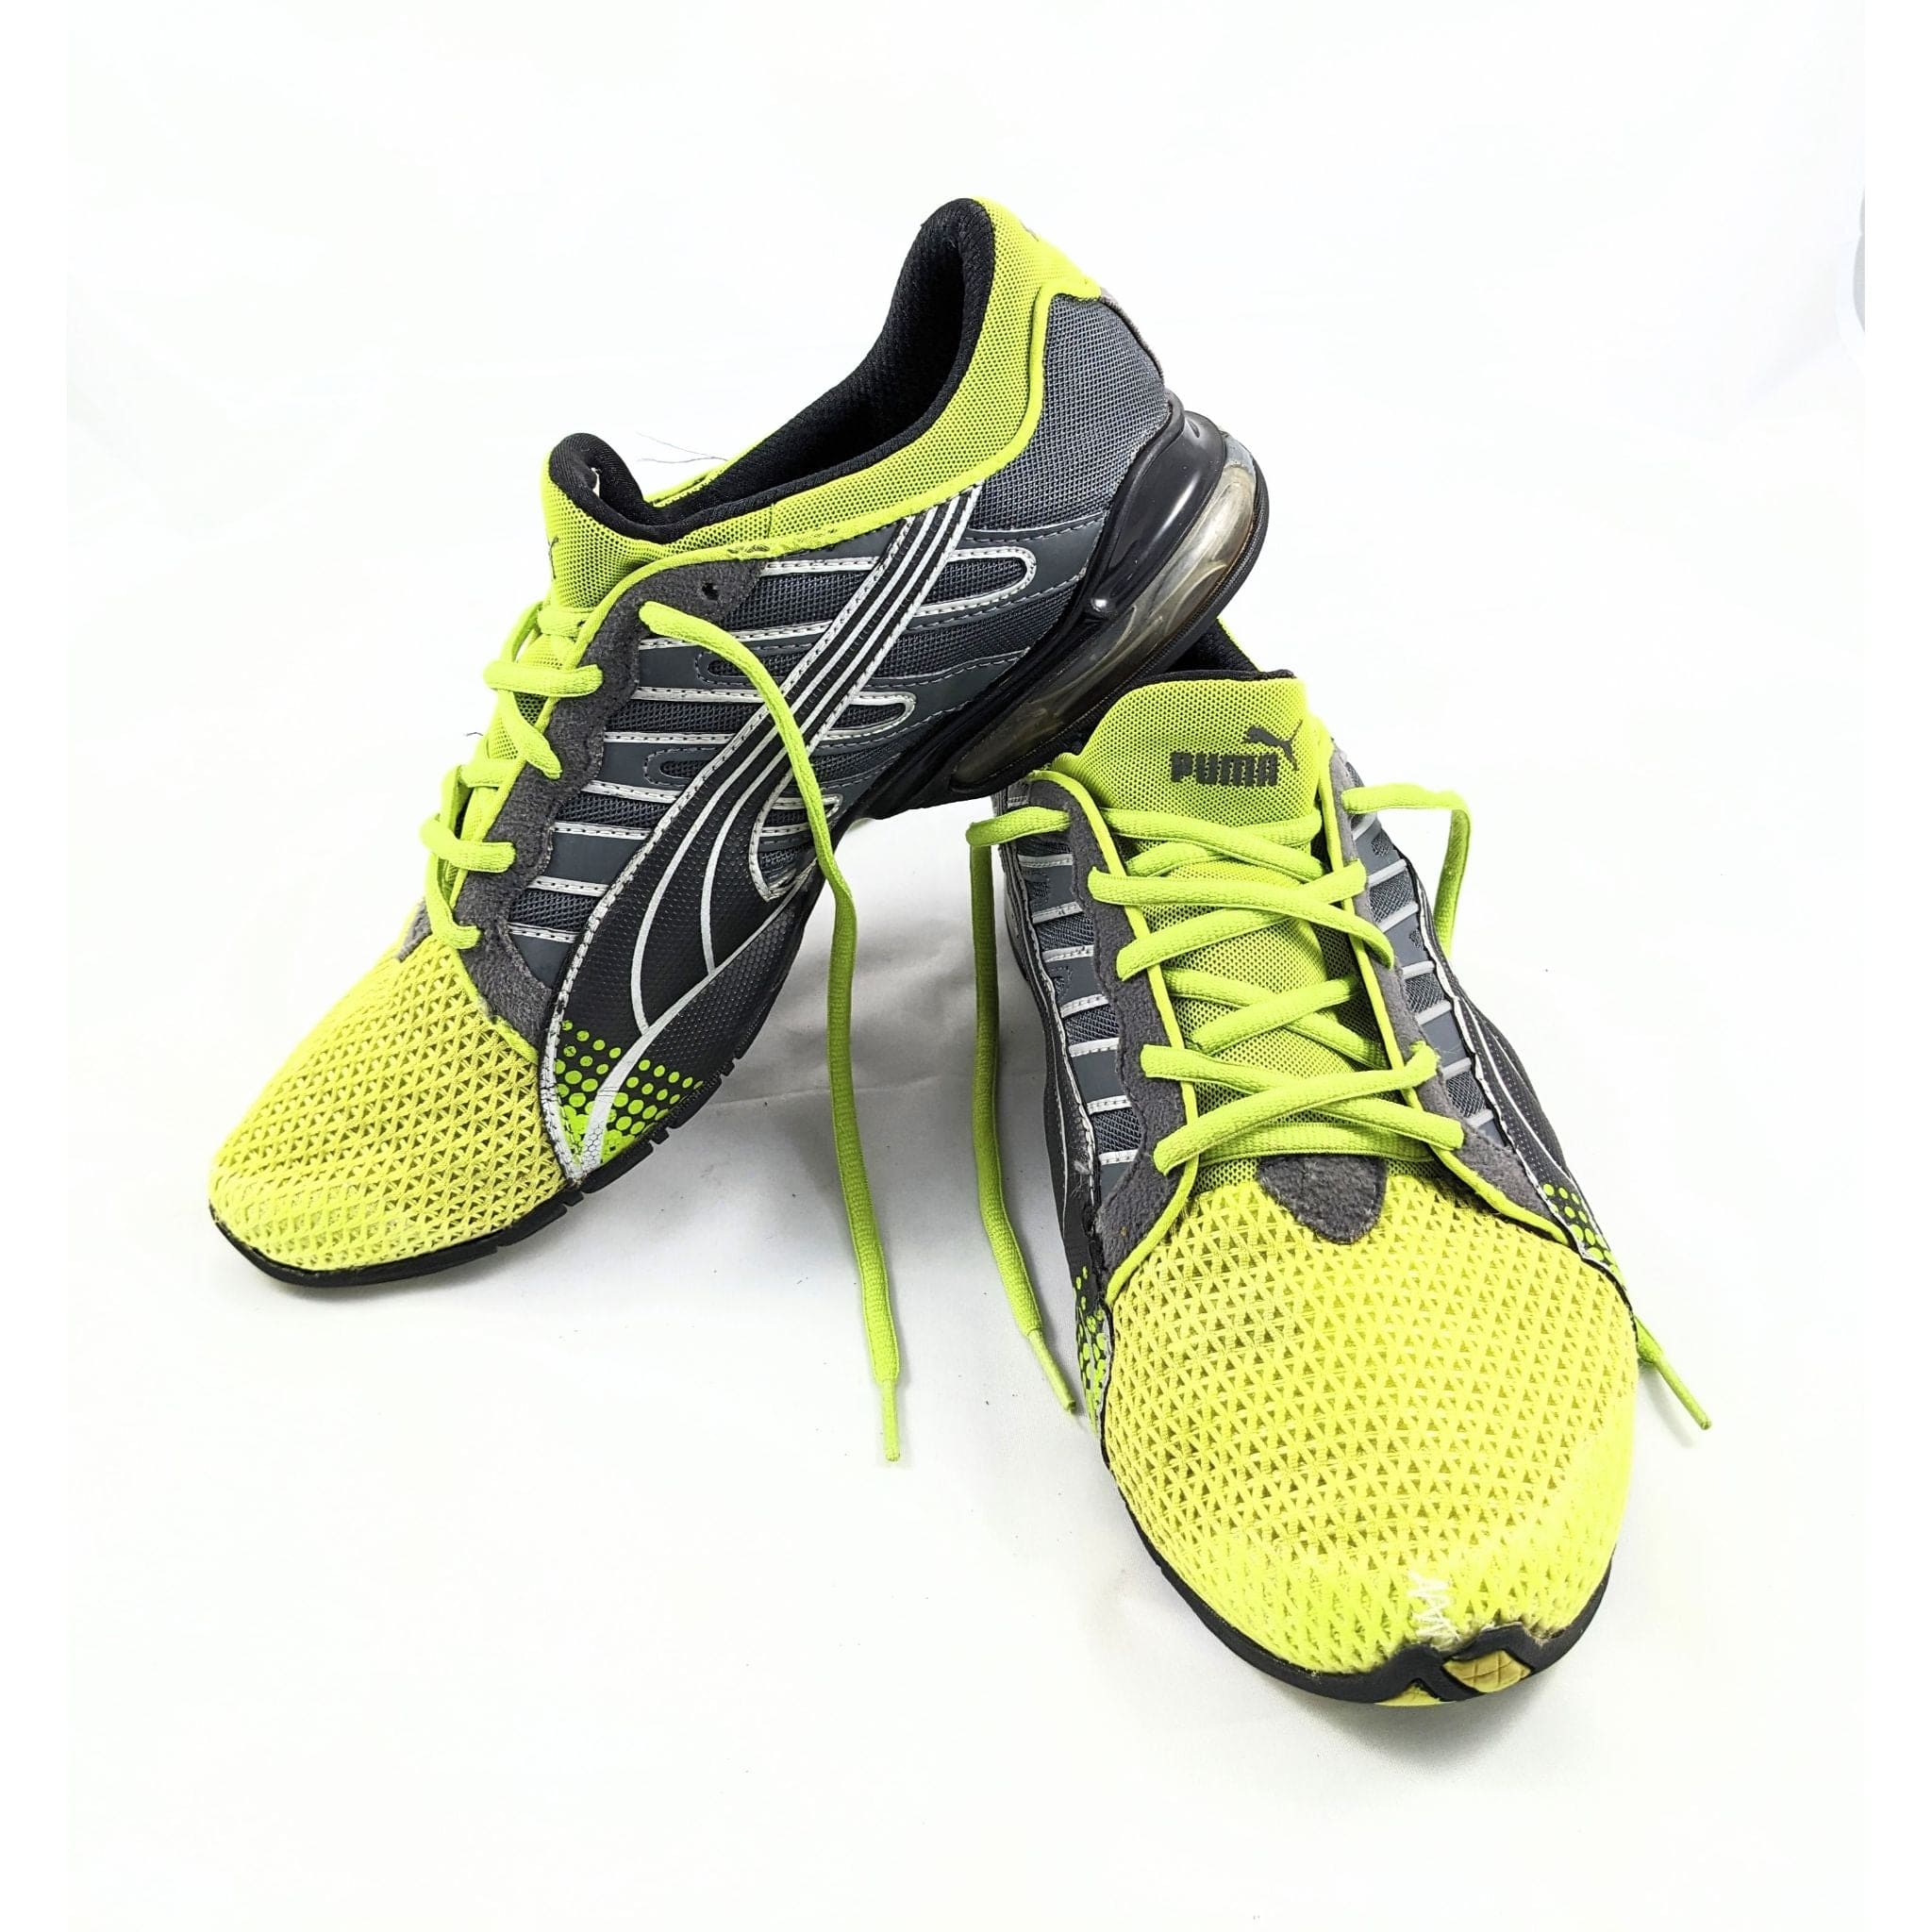 PUMA Green Running Shoes Imported and Origina